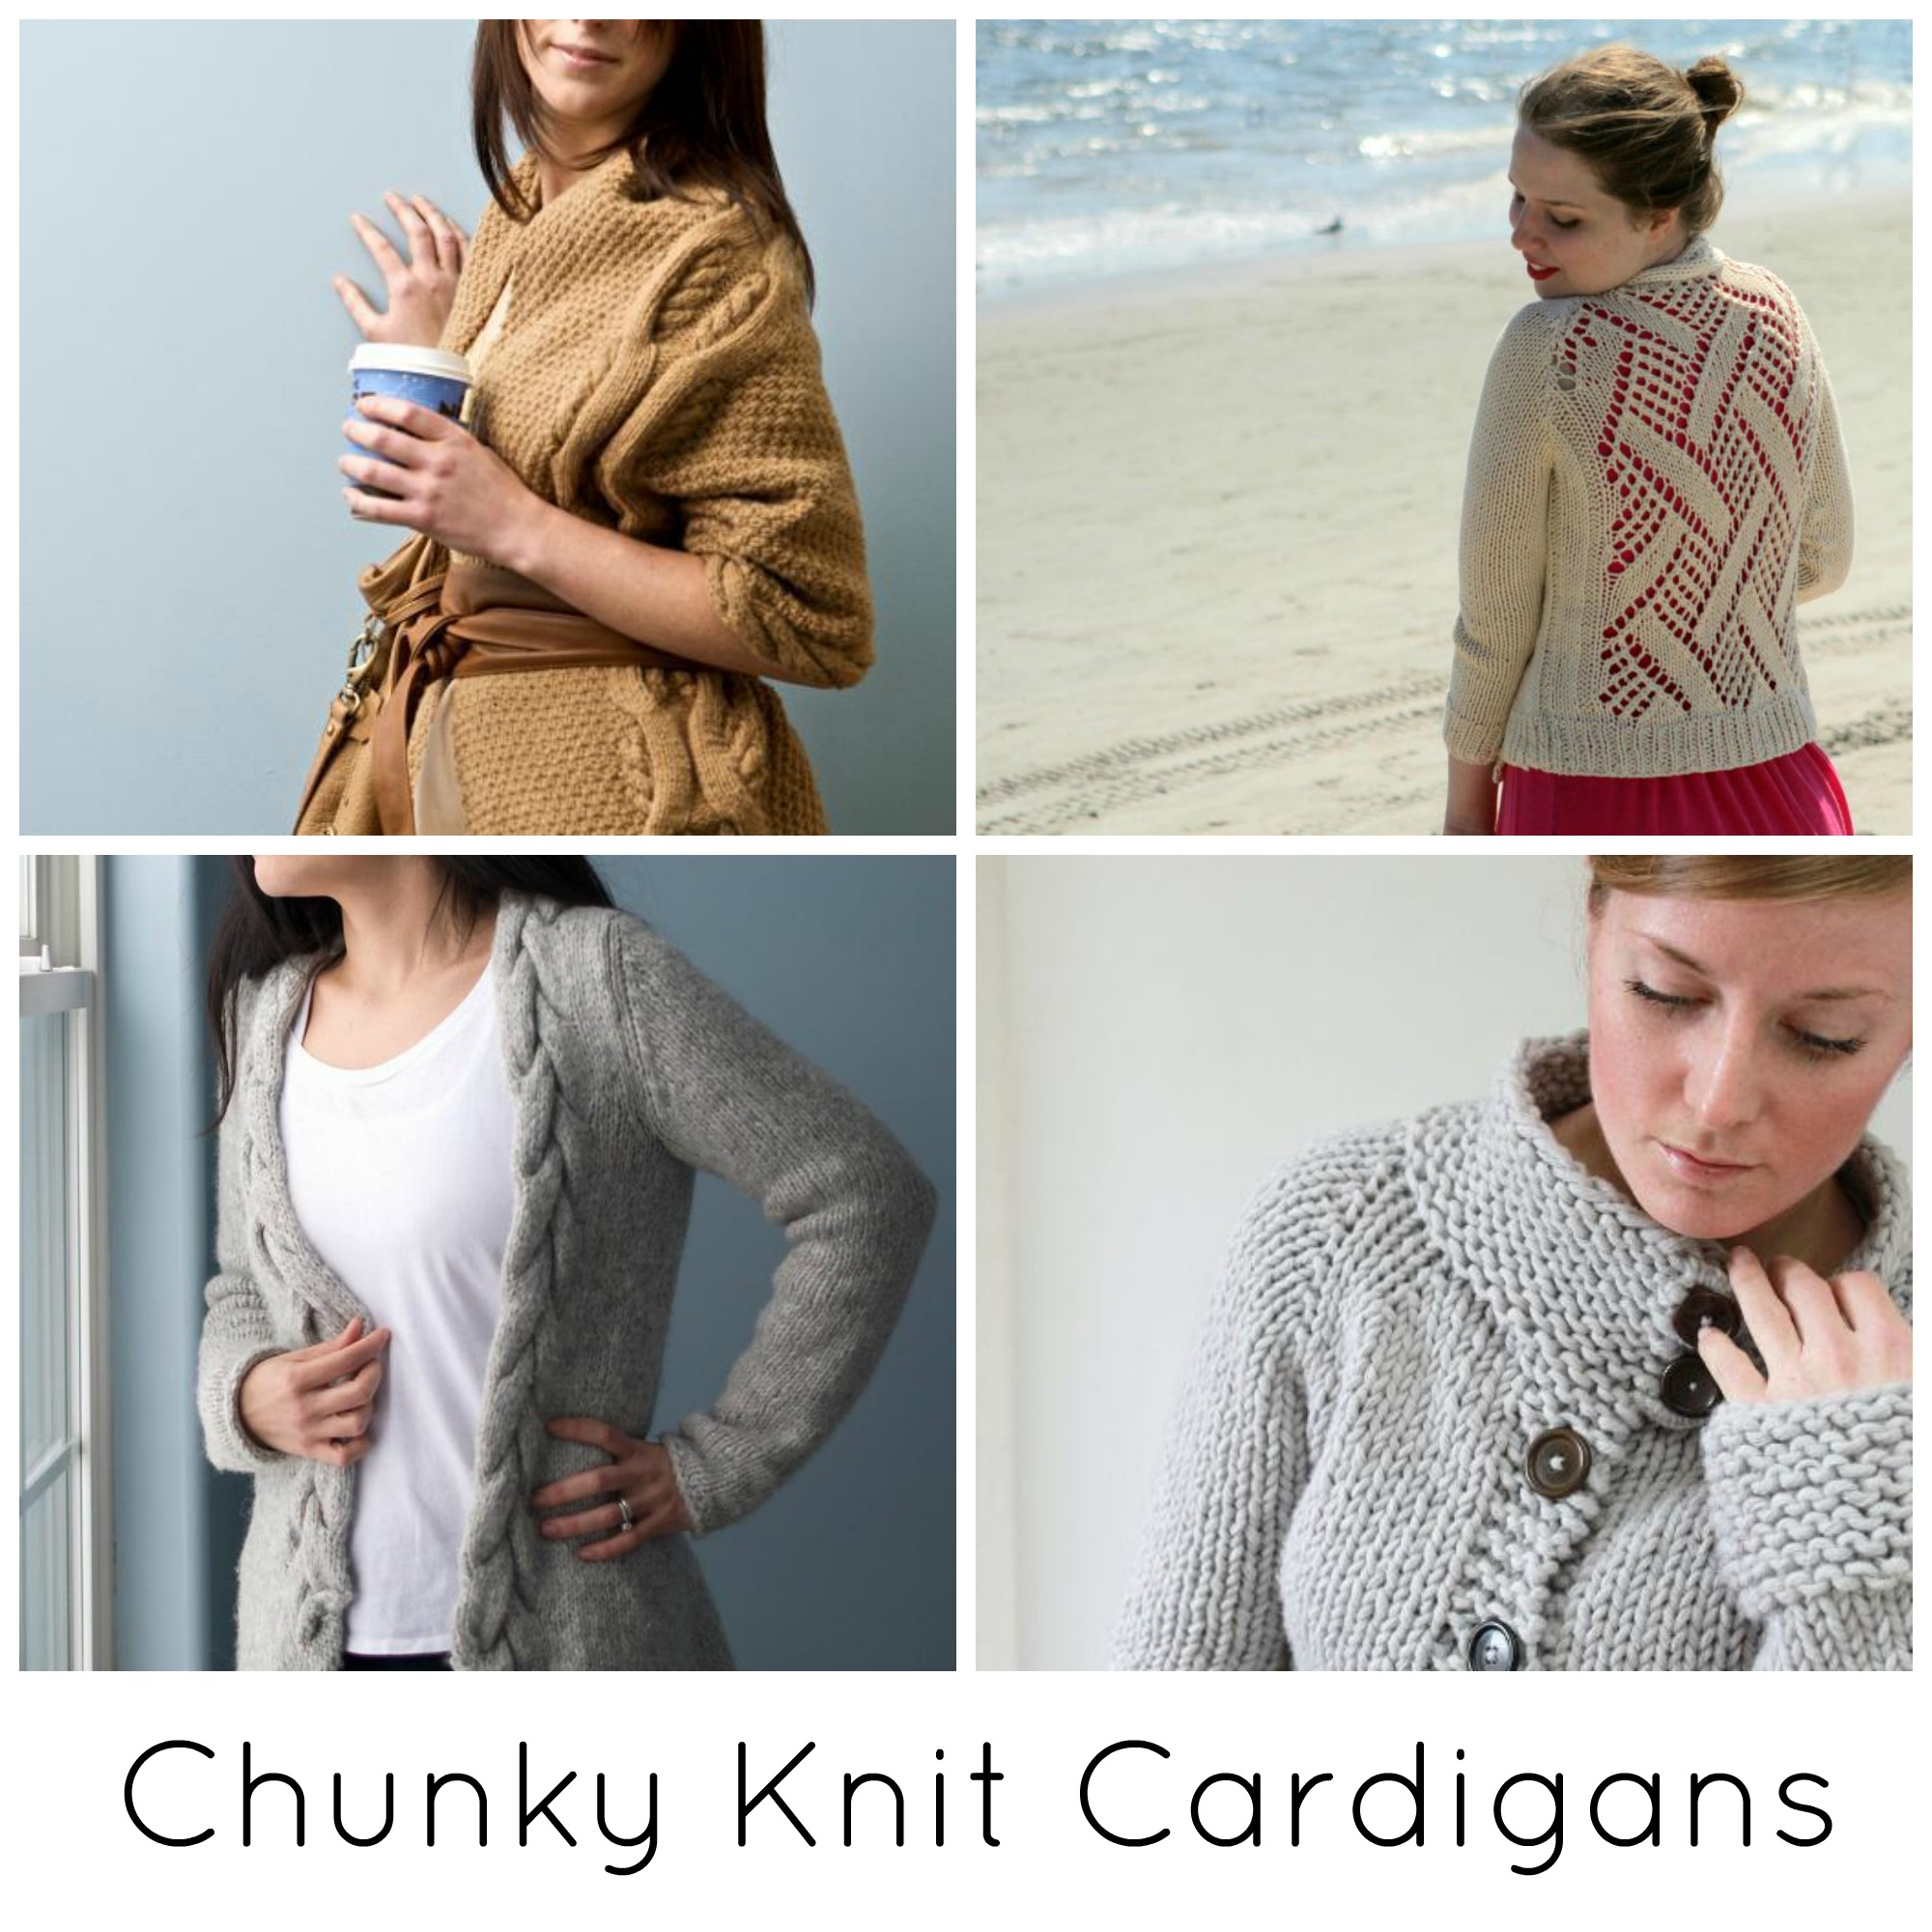 Free Knitting Patterns For Sweater Coats The Coziest Chunky Knit Cardigan Patterns Ever